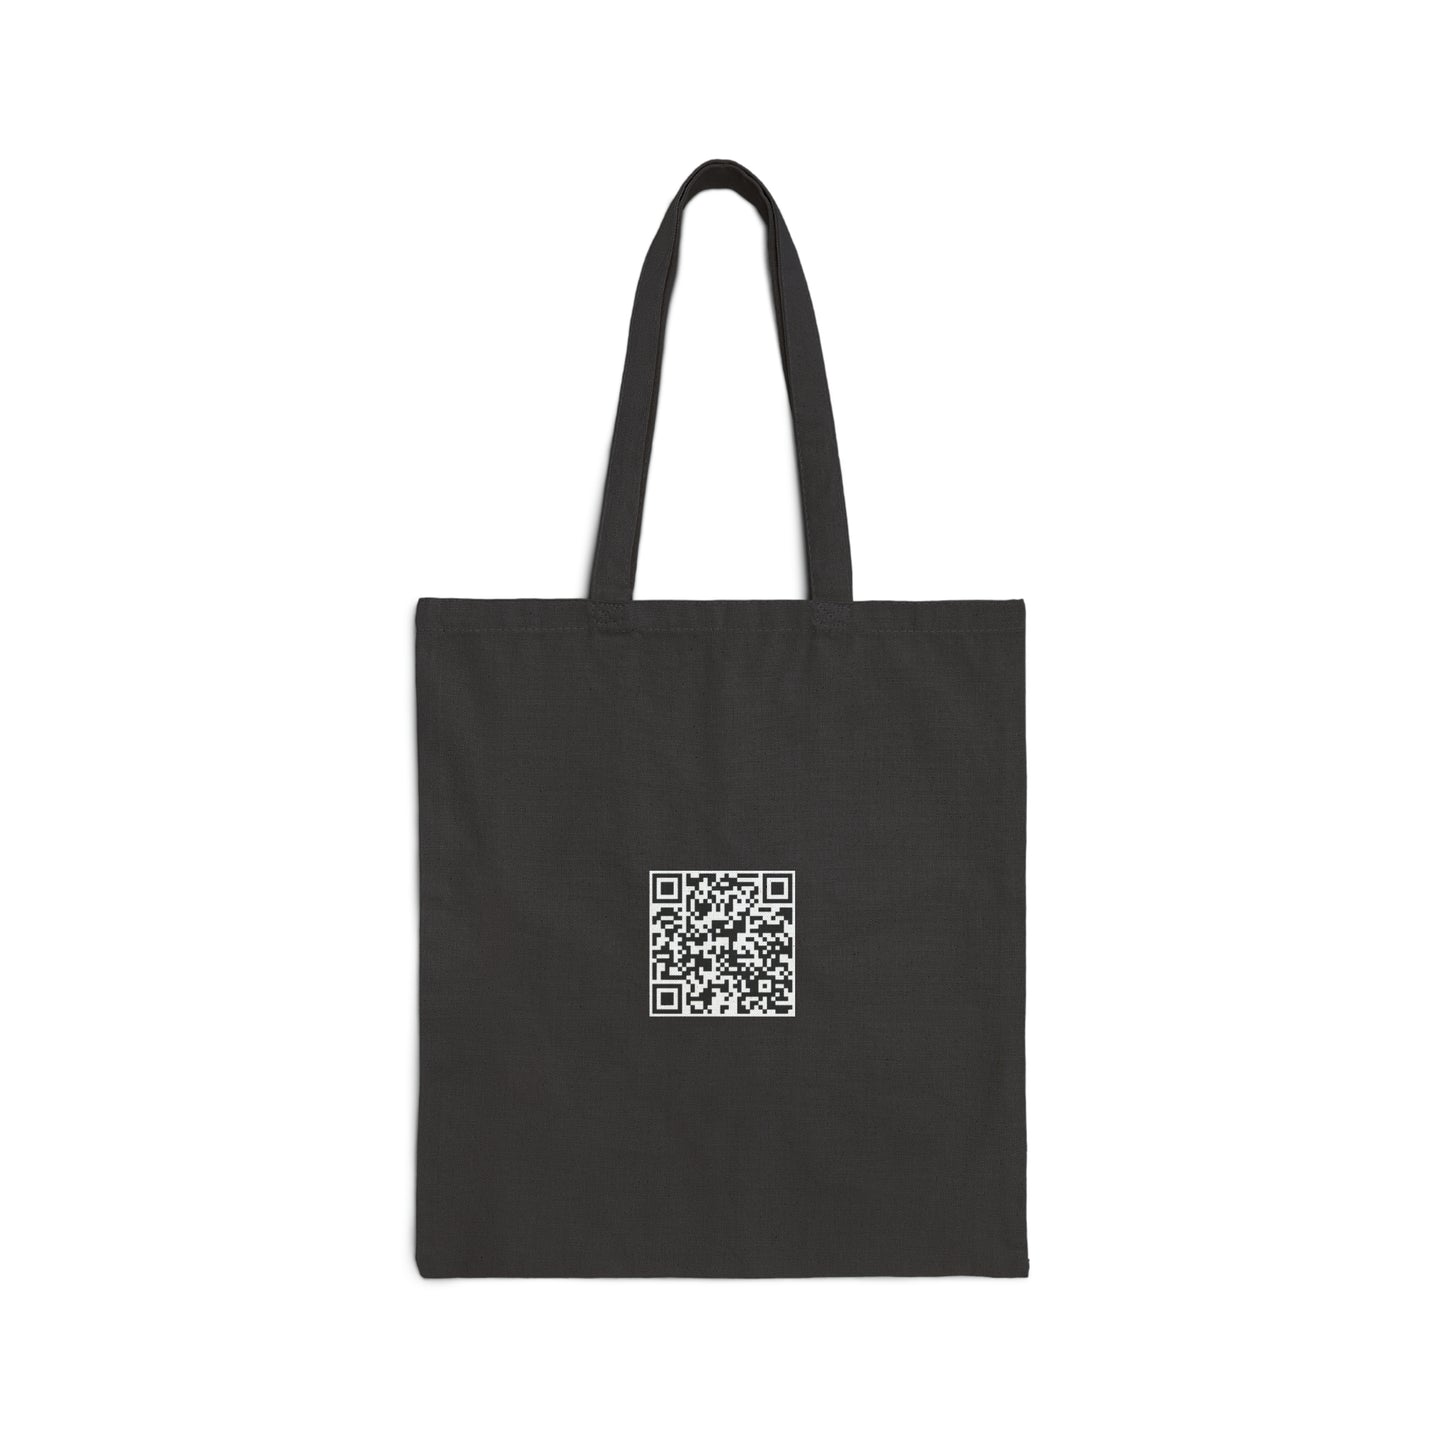 The Game Night Murders - Cotton Canvas Tote Bag